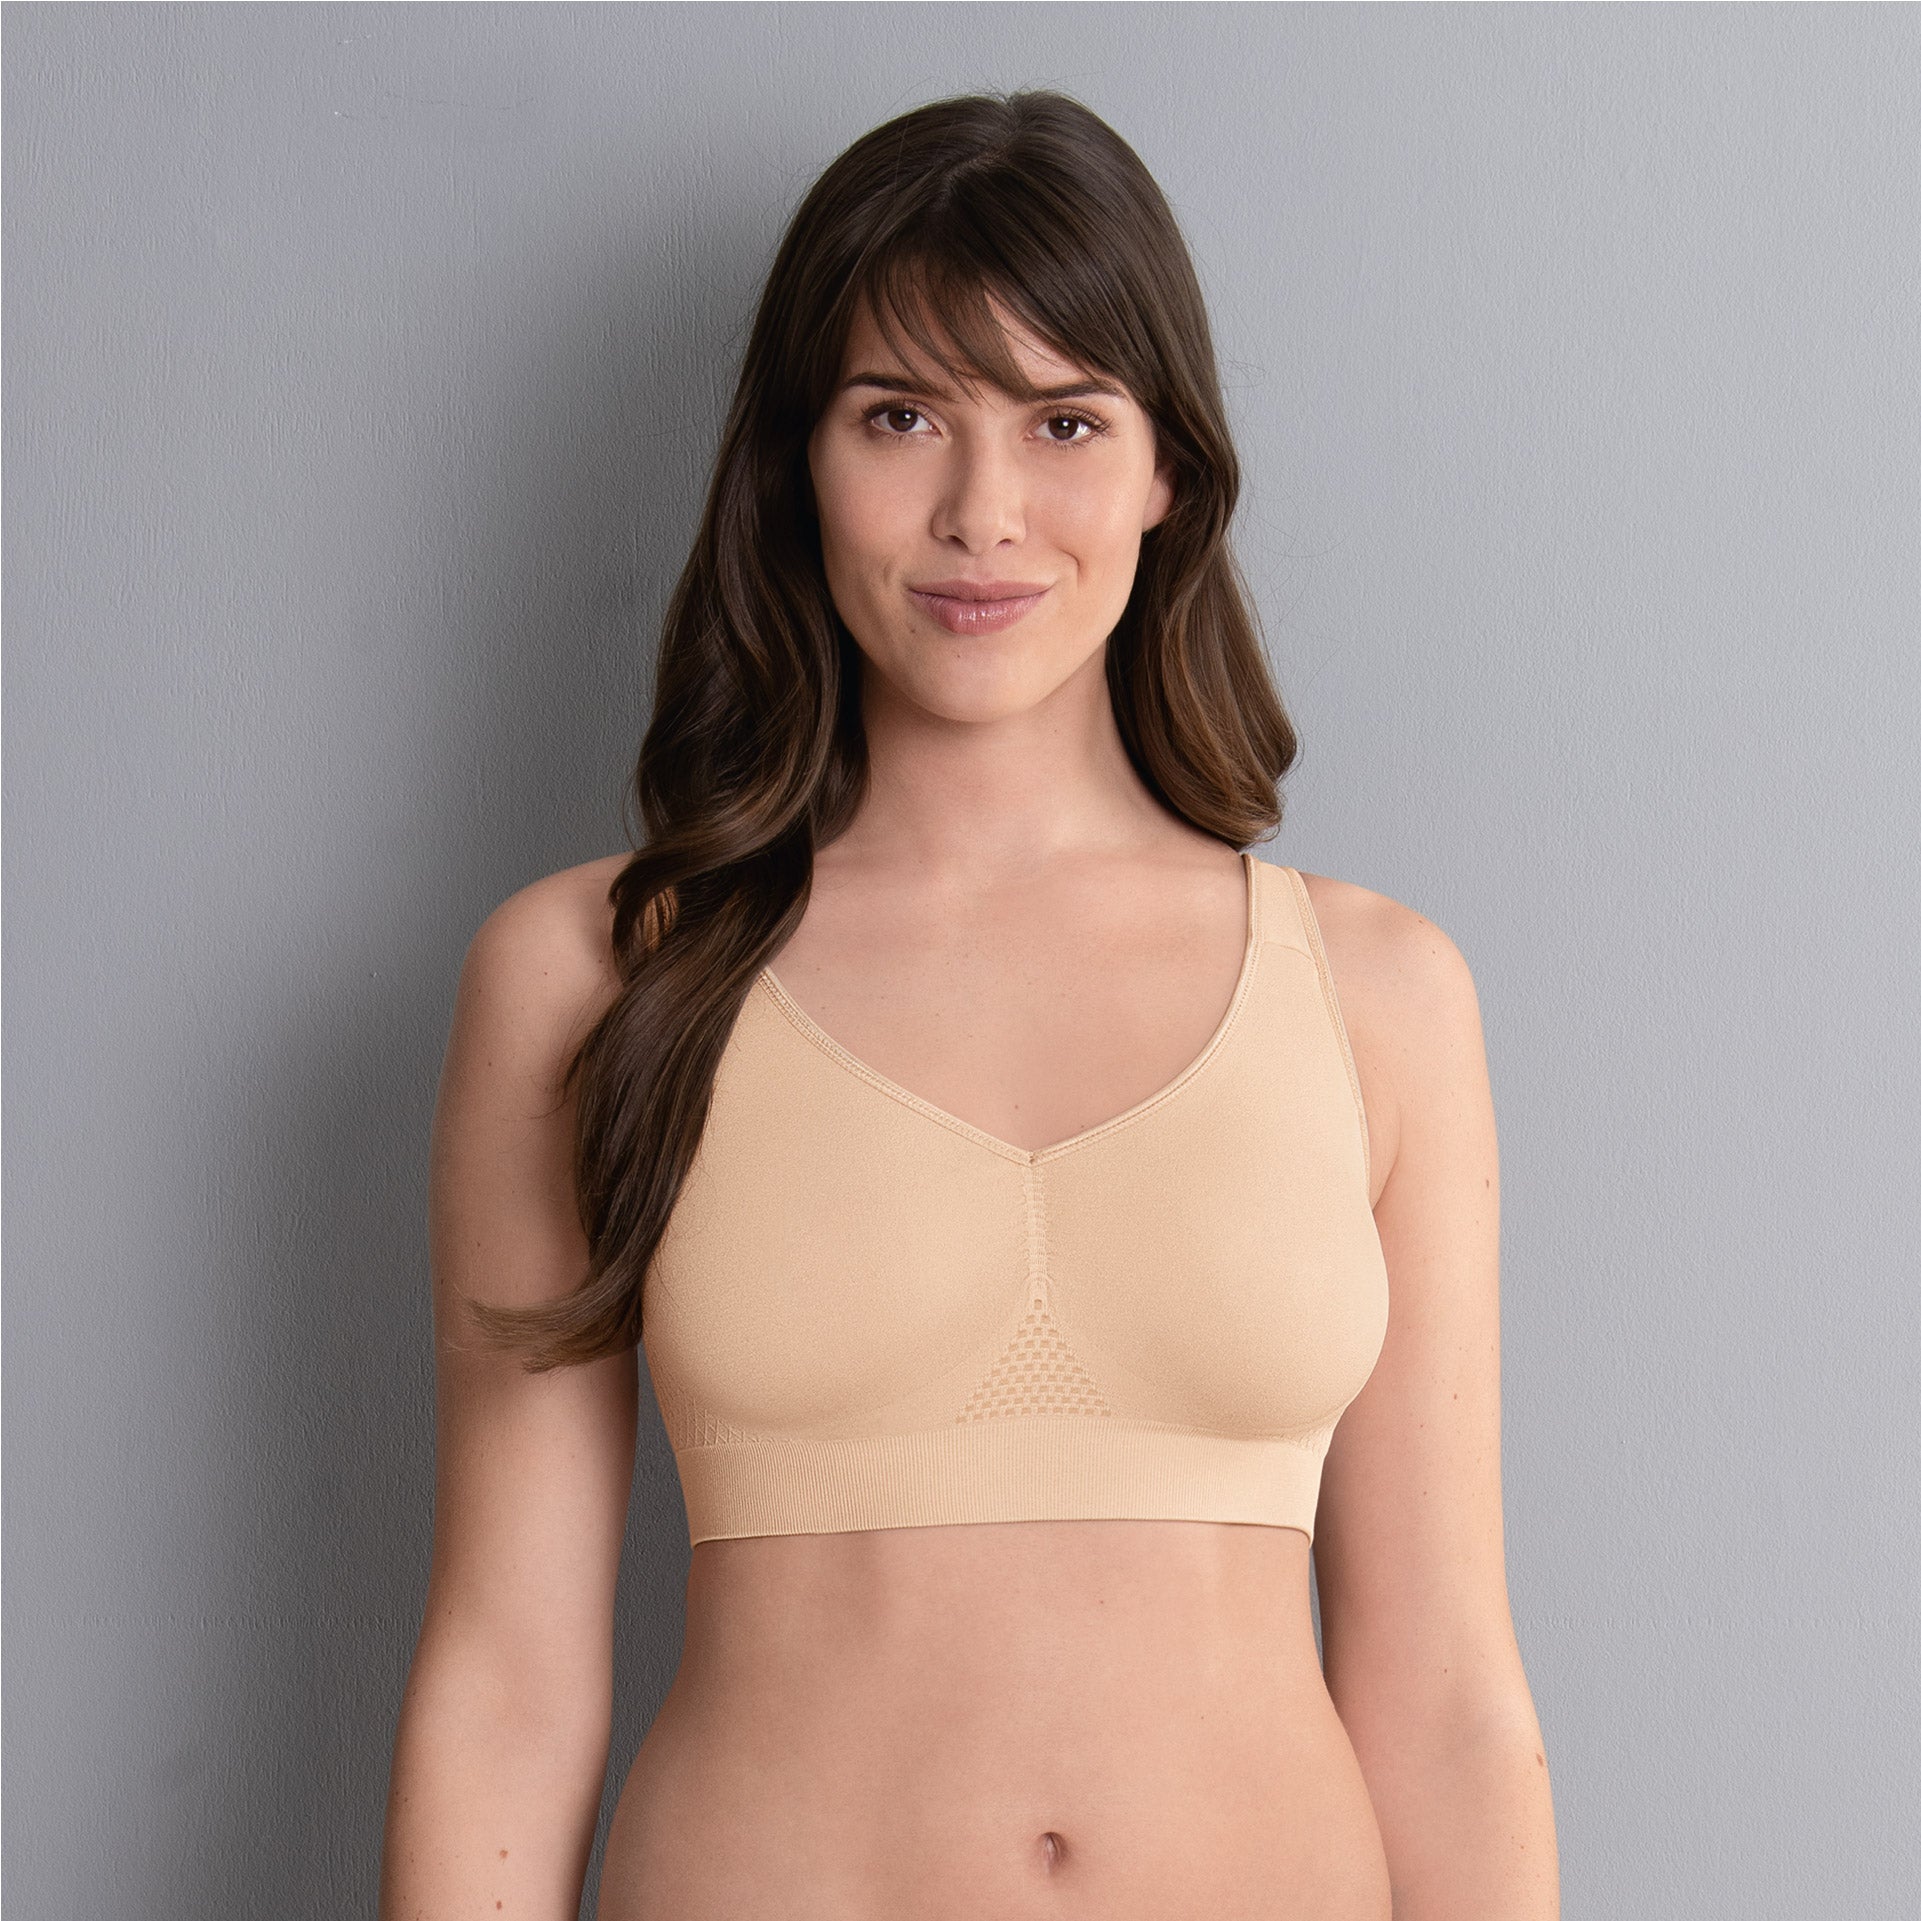 LOTTE, post mastectomy bra, without wires